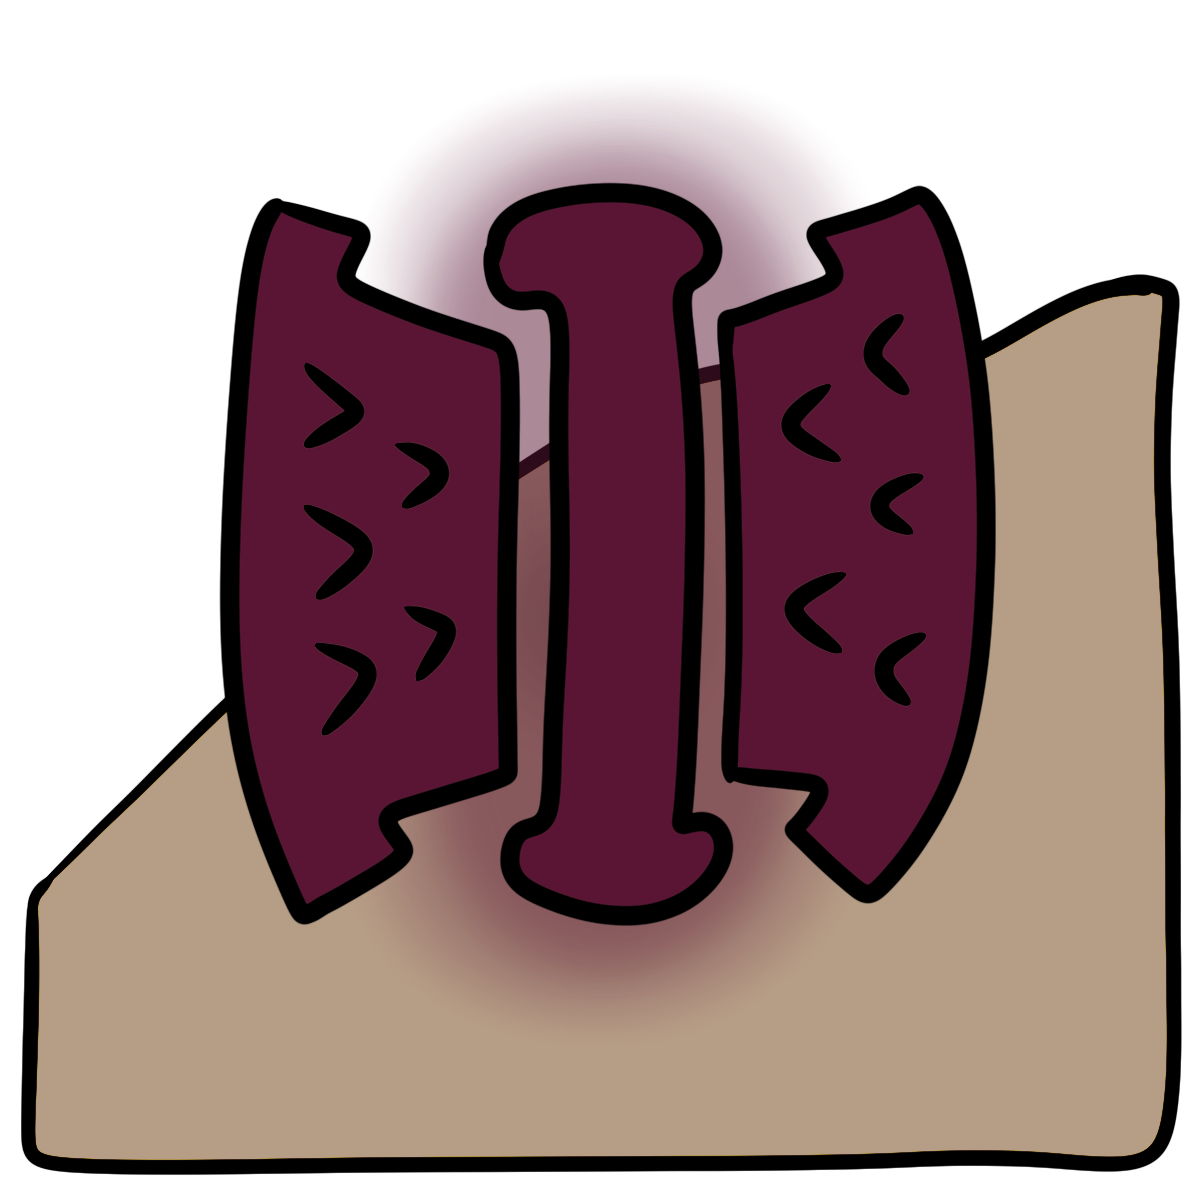 A dark magenta blob squeezed on both sides by anvil shaped blobs with carrot shapes pointing in. Curved beige skin fills the bottom half of the background.